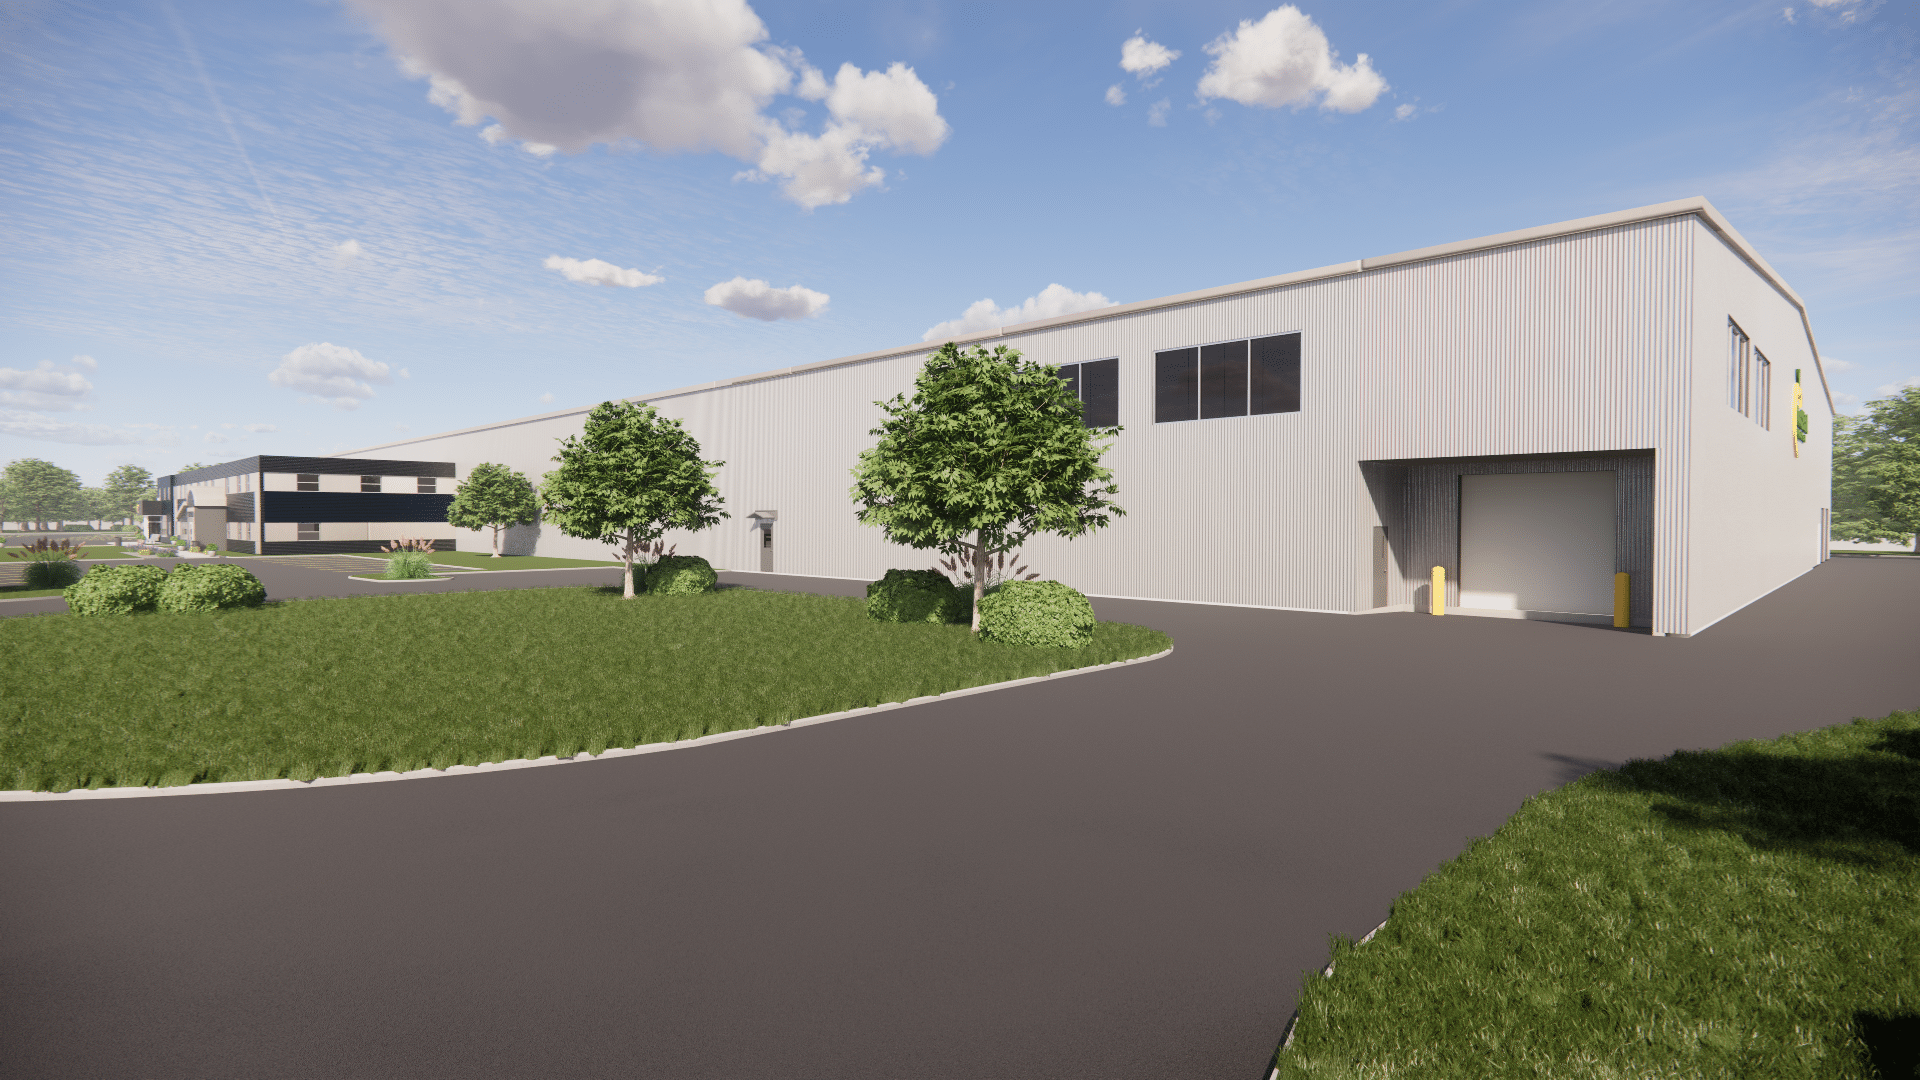 27.07.2023 New Warehouse Rendering with both trees